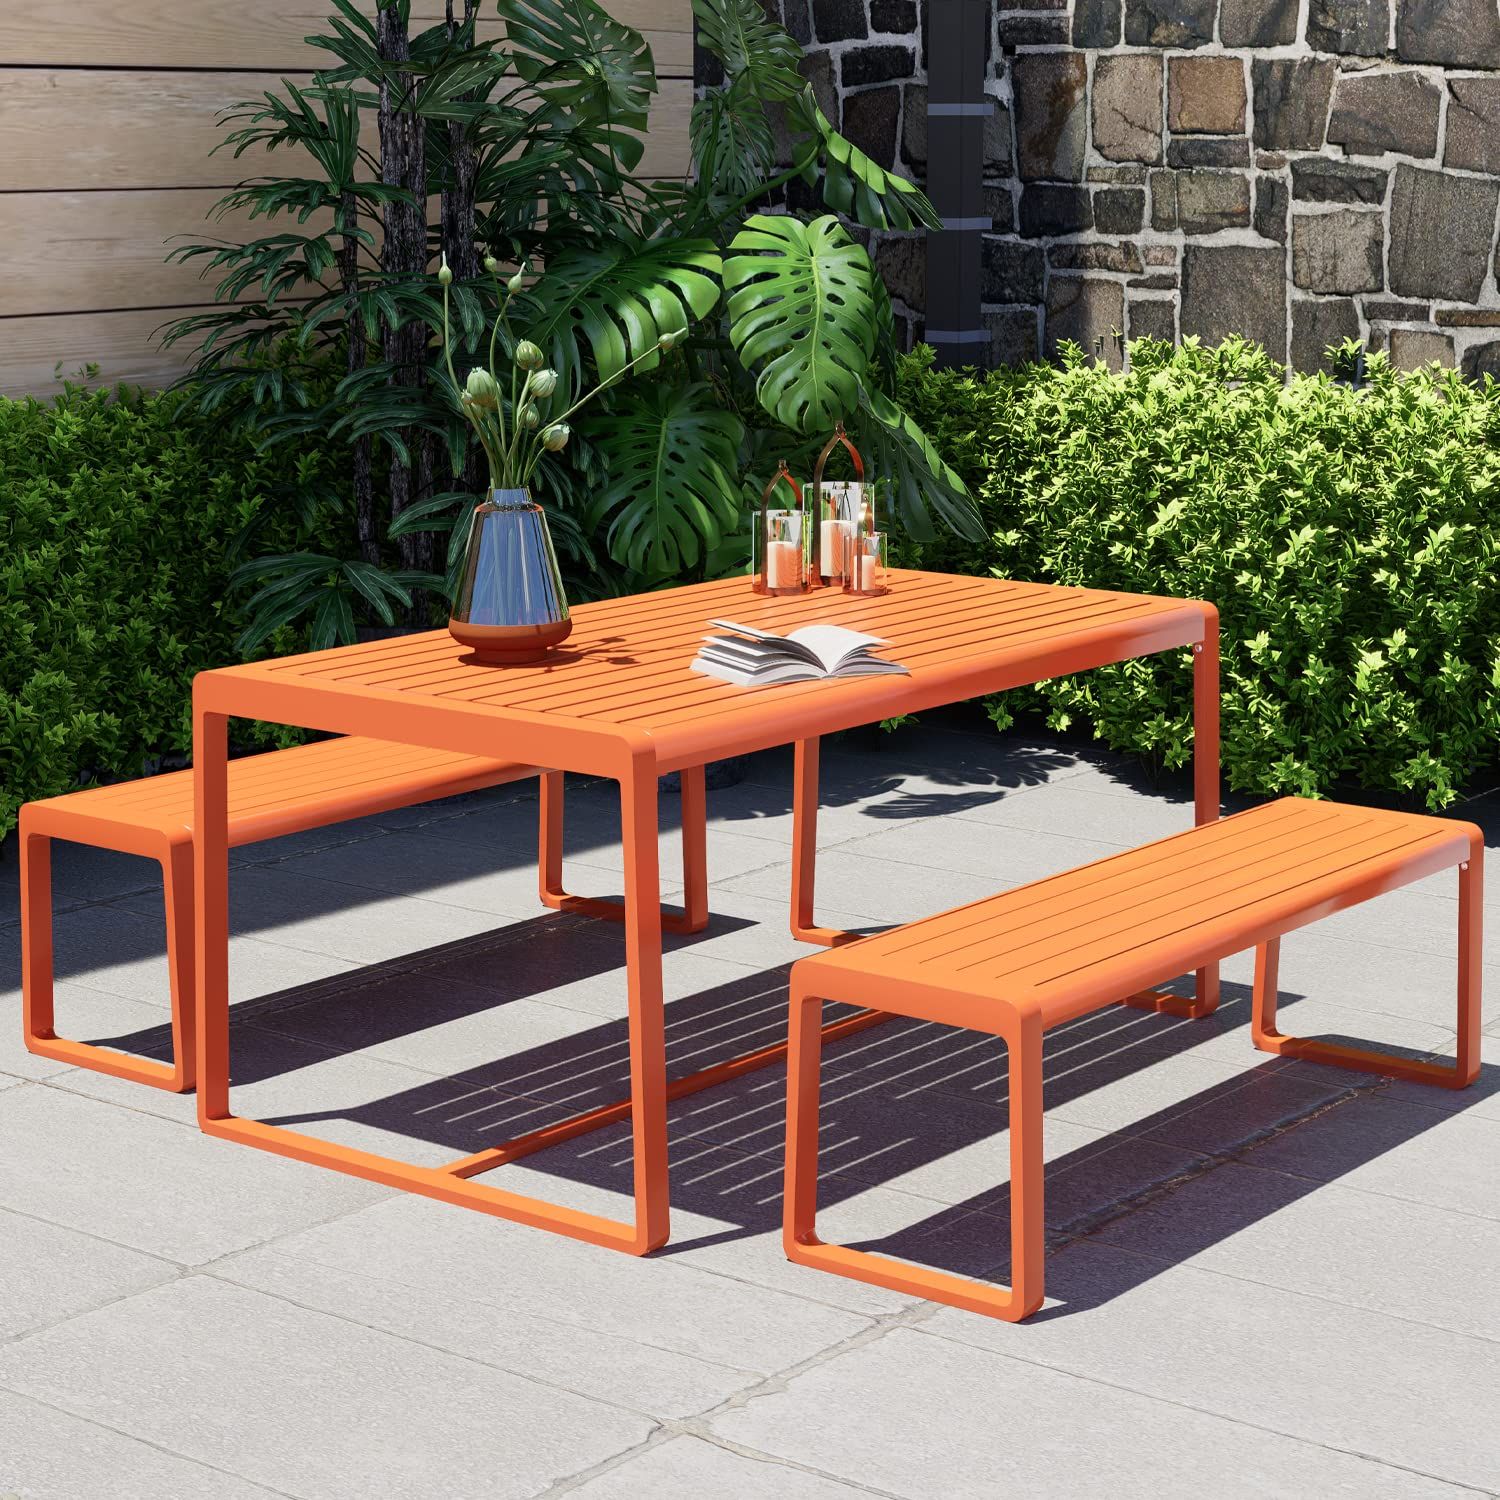 Enhance Your Outdoor Space with Stylish Patio Table Sets